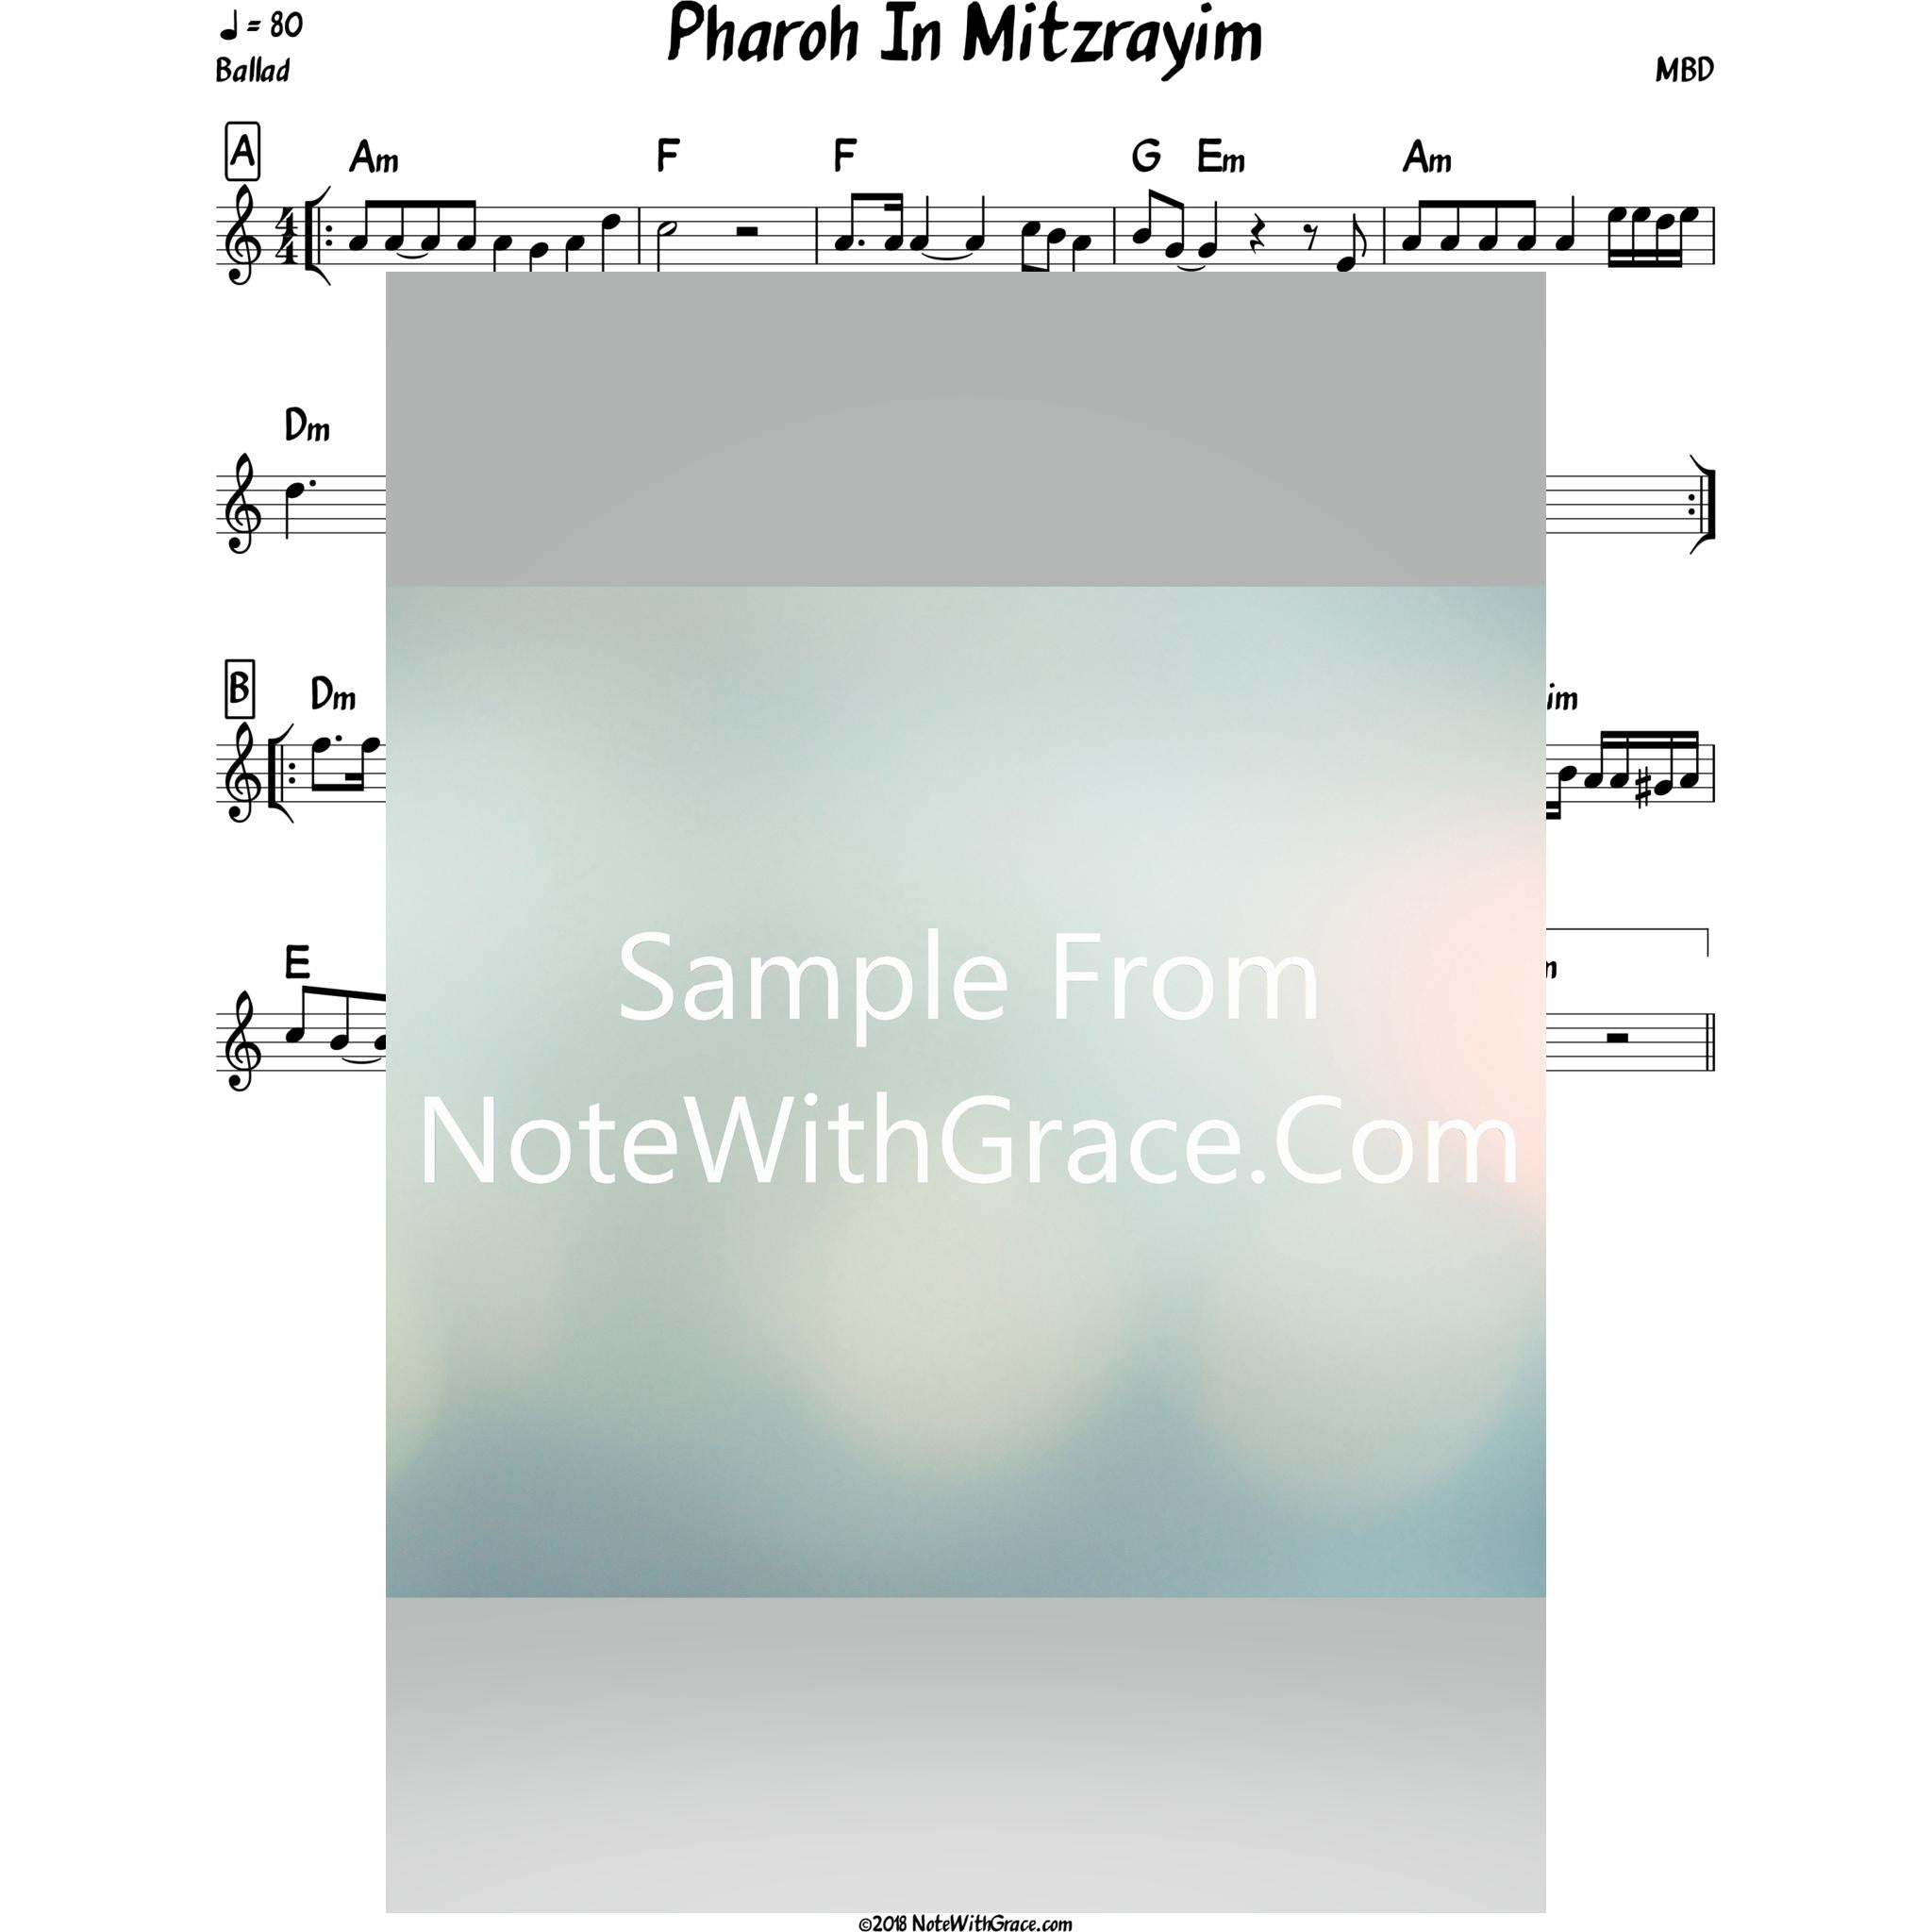 Pharoh In Mitzrayim Lead Sheet (MBD) Album: The Yiddish Collection 2007-Sheet music-NoteWithGrace.com